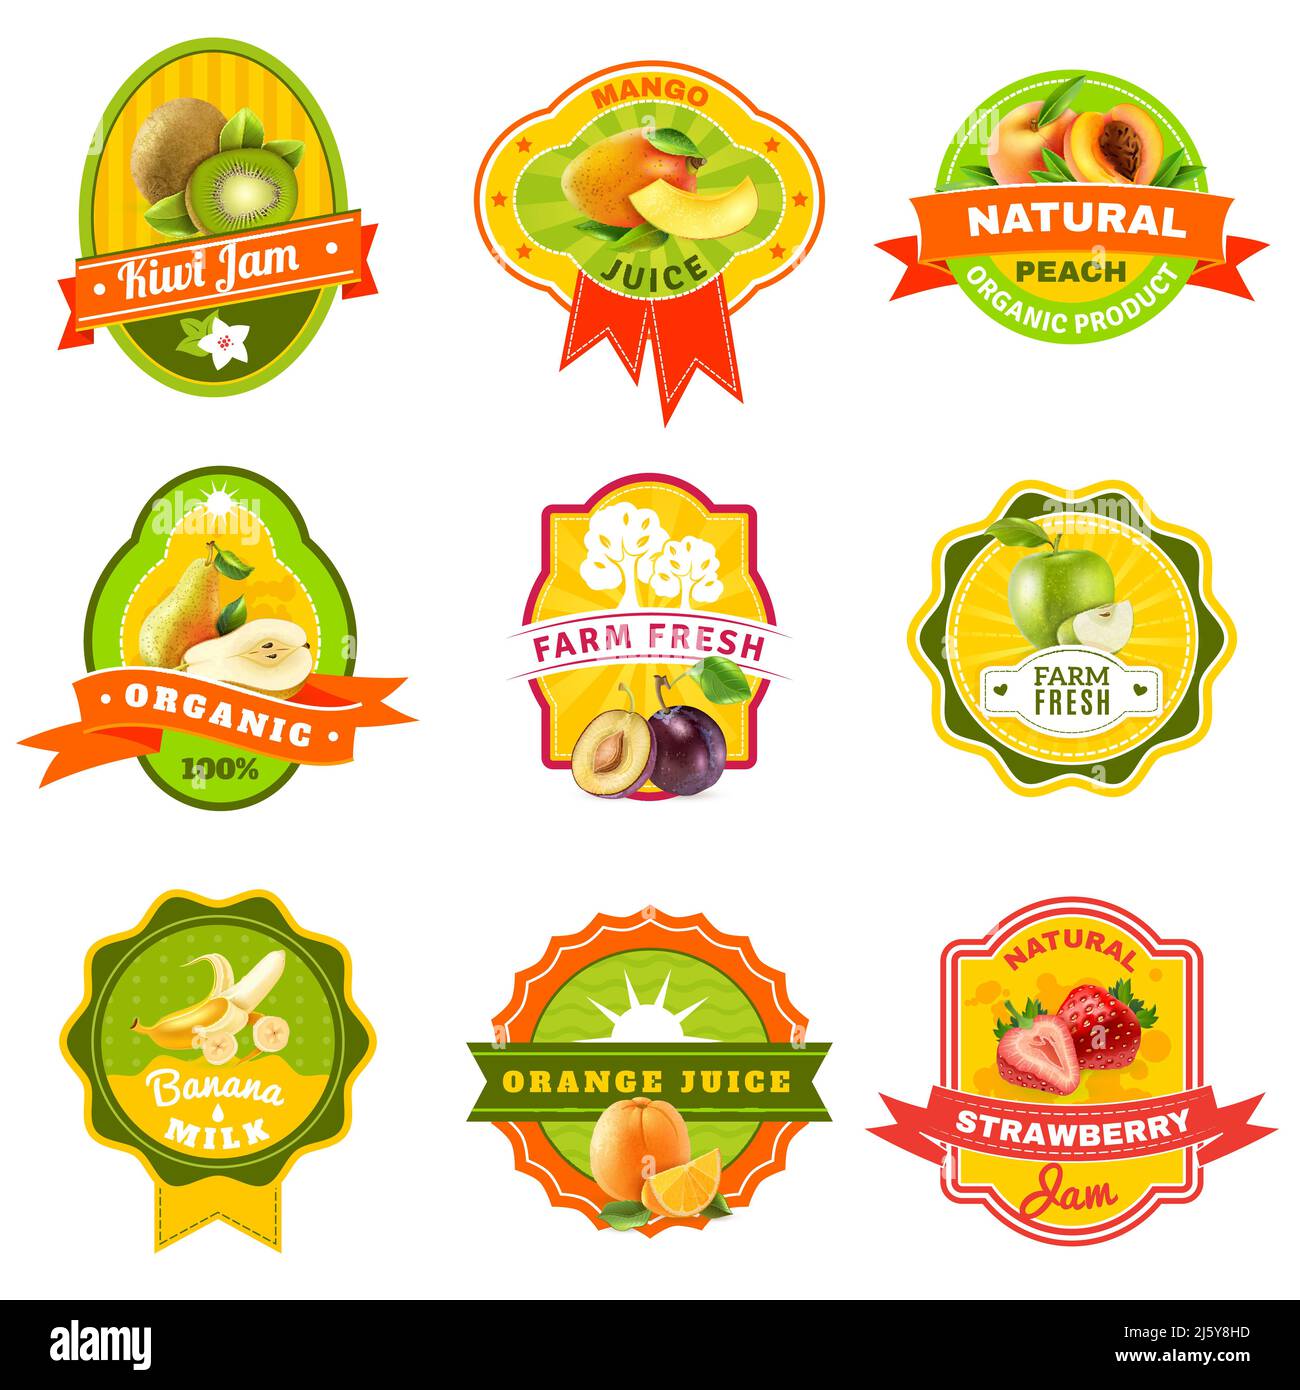 Natural organically grown fruits products emblems labels collection for healthy responsible diet abstract isolated vector illustration Stock Vector